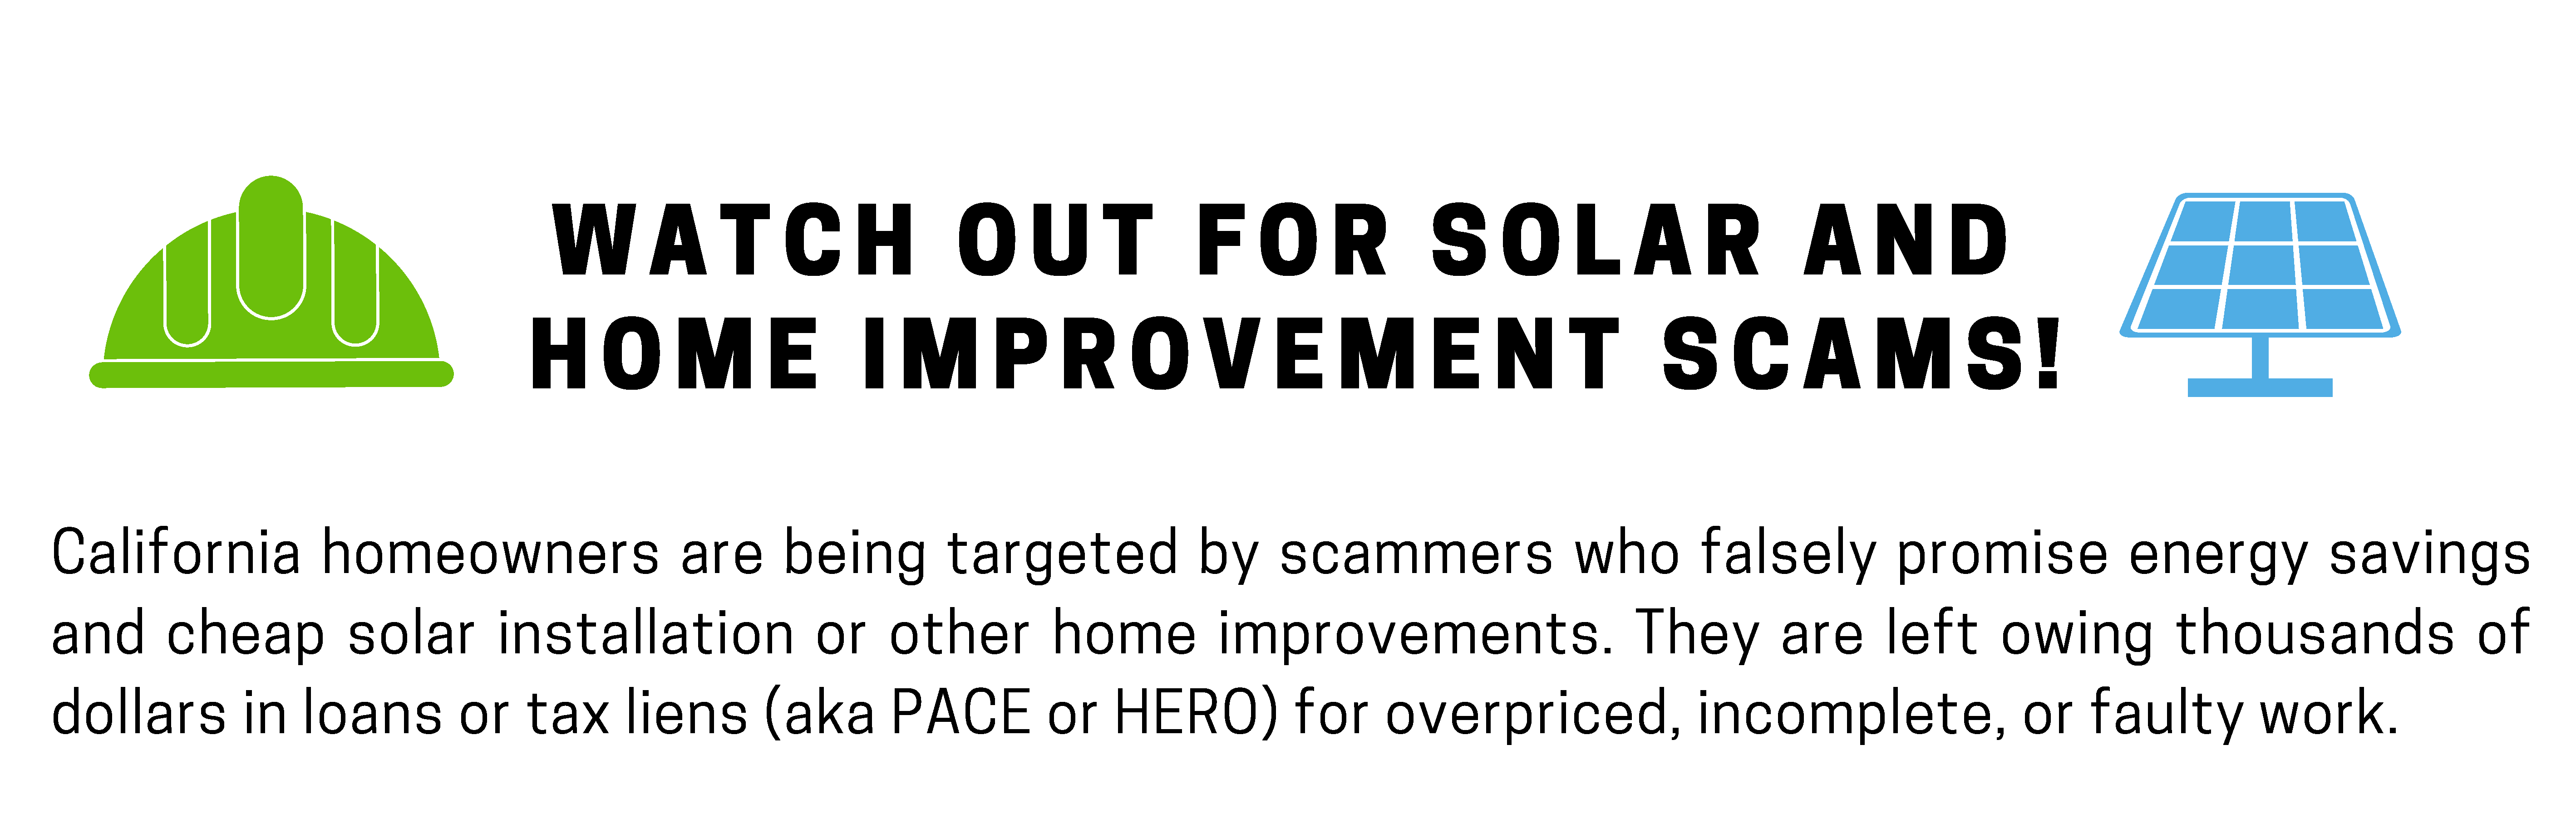 Downloadable about scams involving solar panel installation and other home improvements